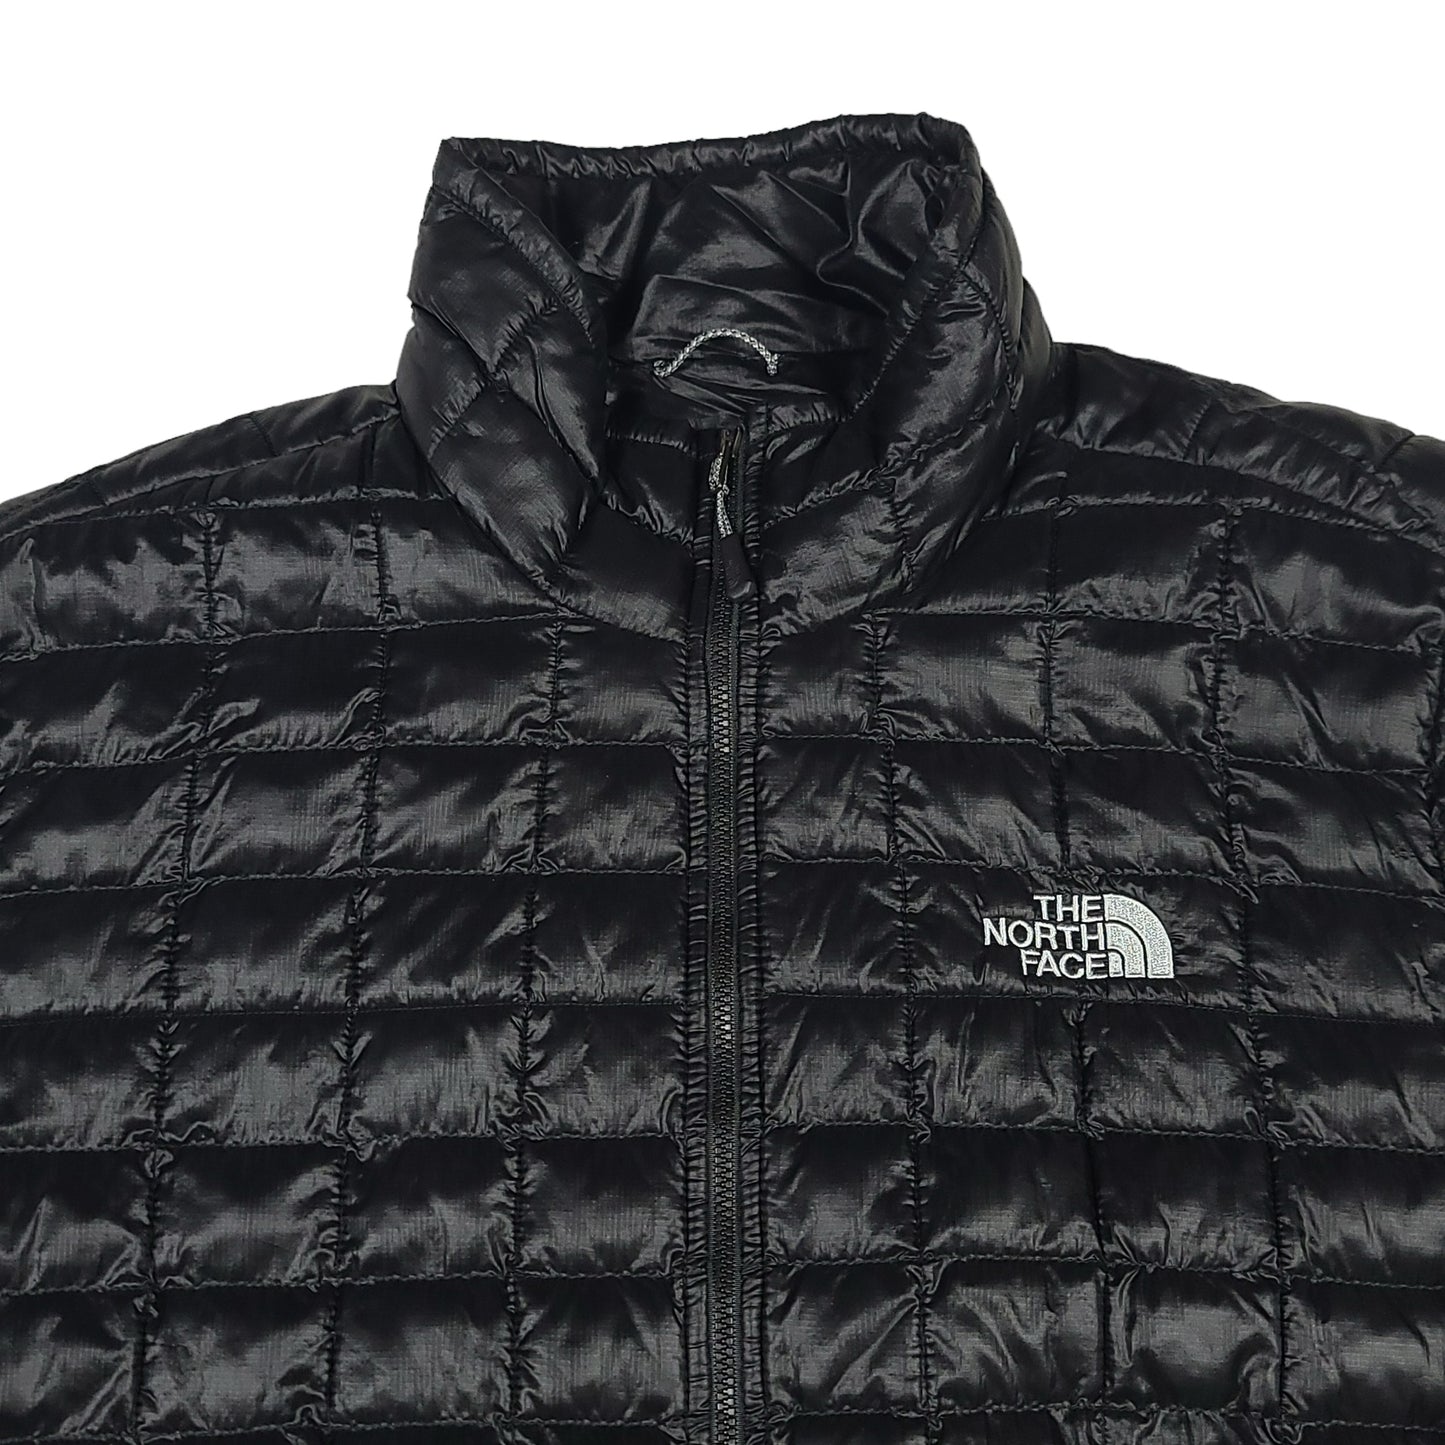 The North Face Black Thermoball Puffer Jacket